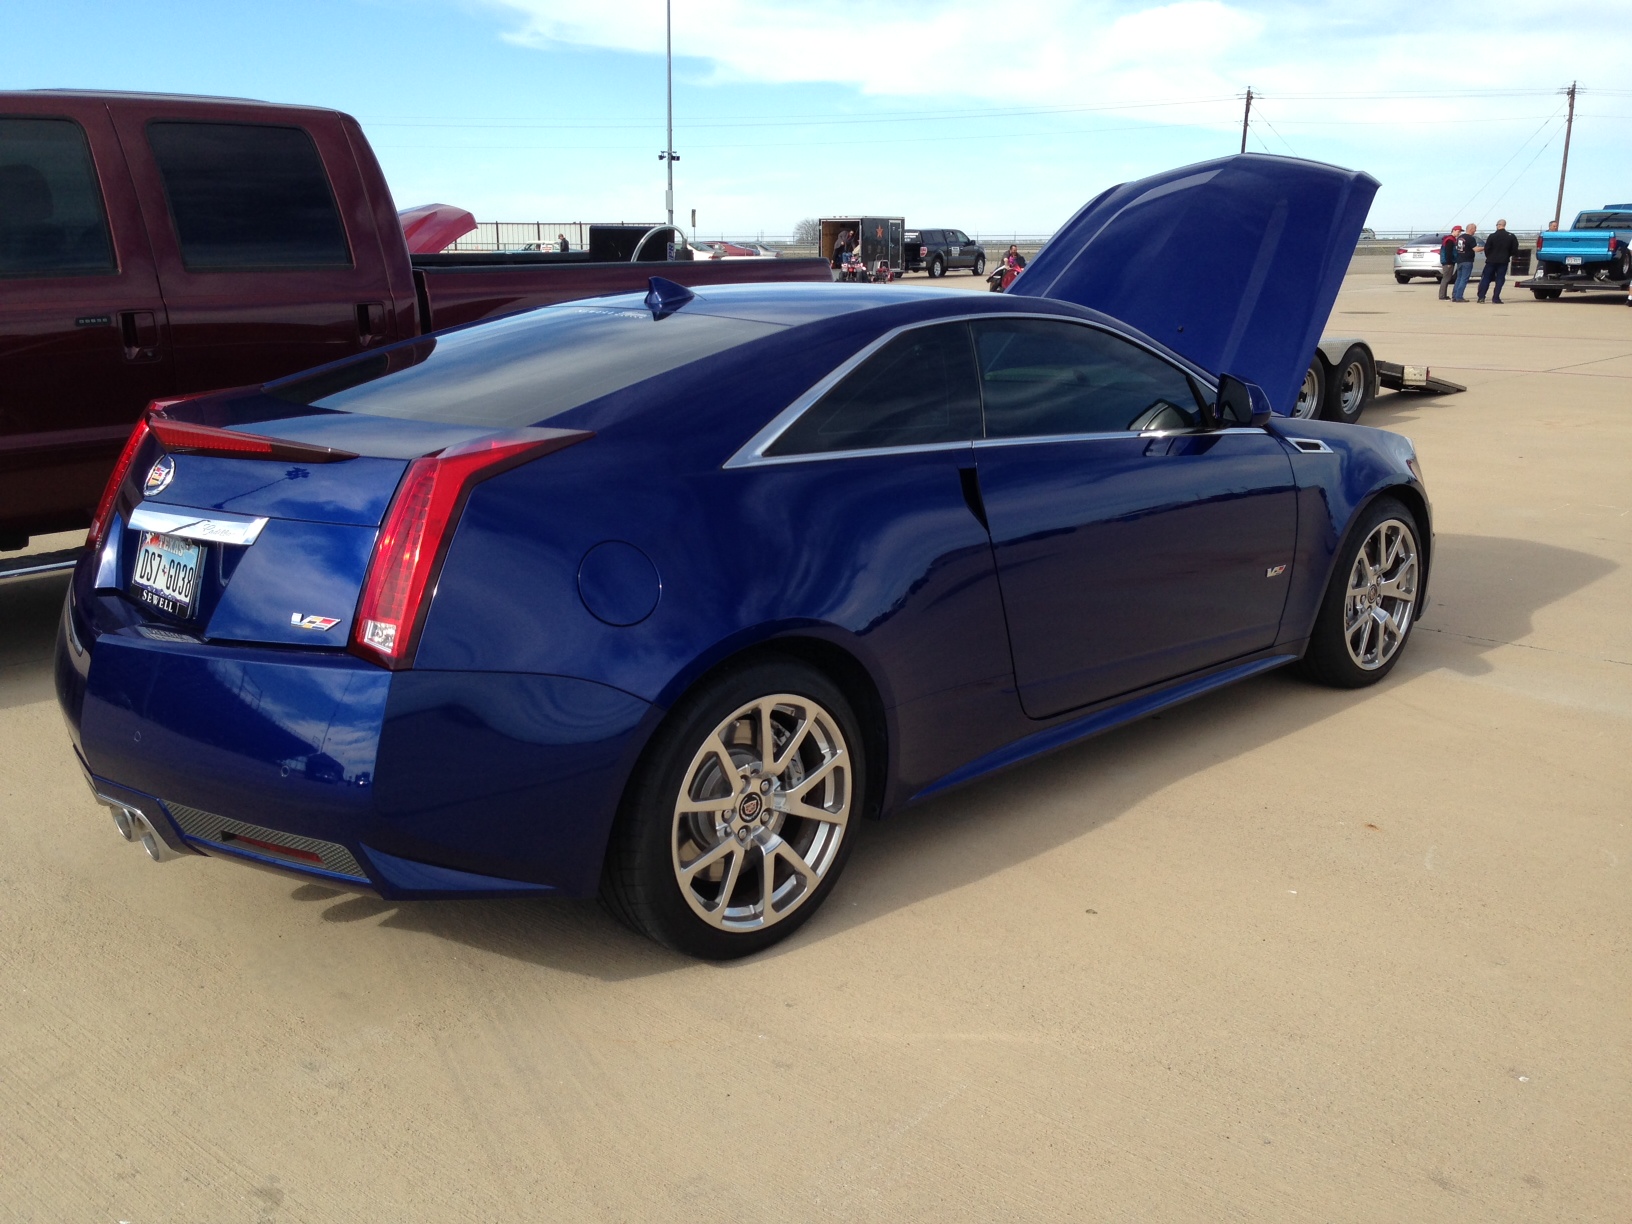 2012 Opulent Blue Cadillac CTS-V Coupe picture, mods, upgrades